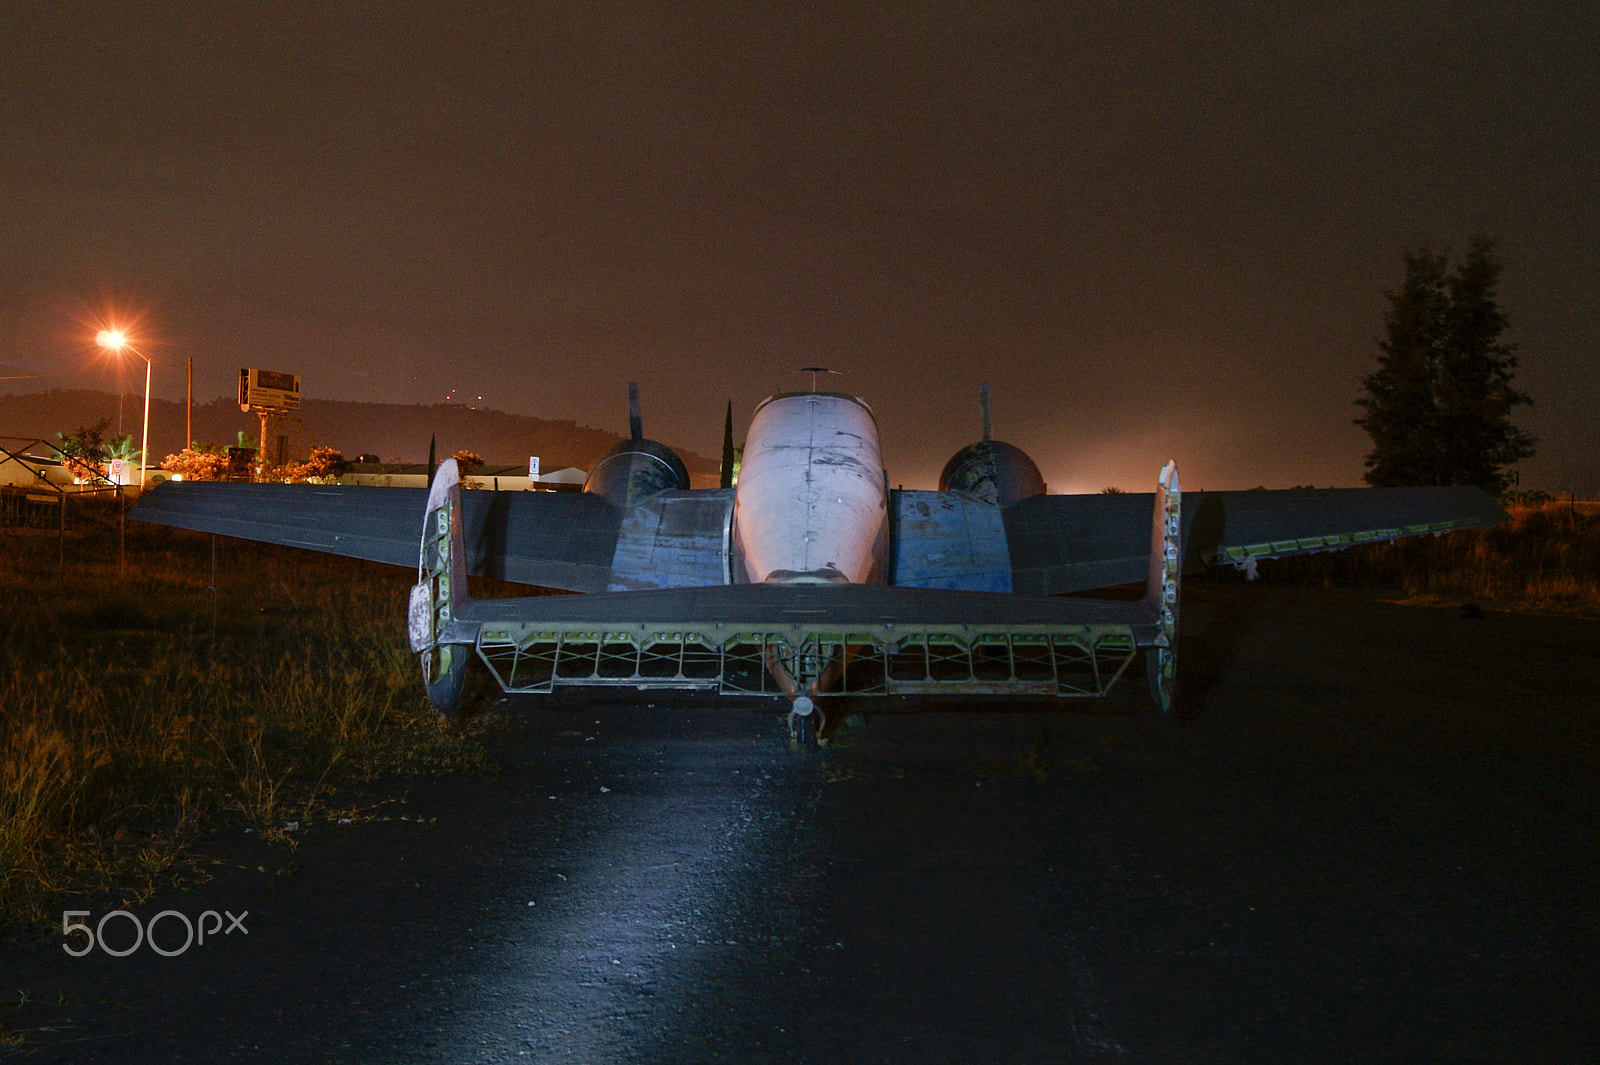 Sony Alpha DSLR-A380 sample photo. Rear view of an old beechcraft at night. photography